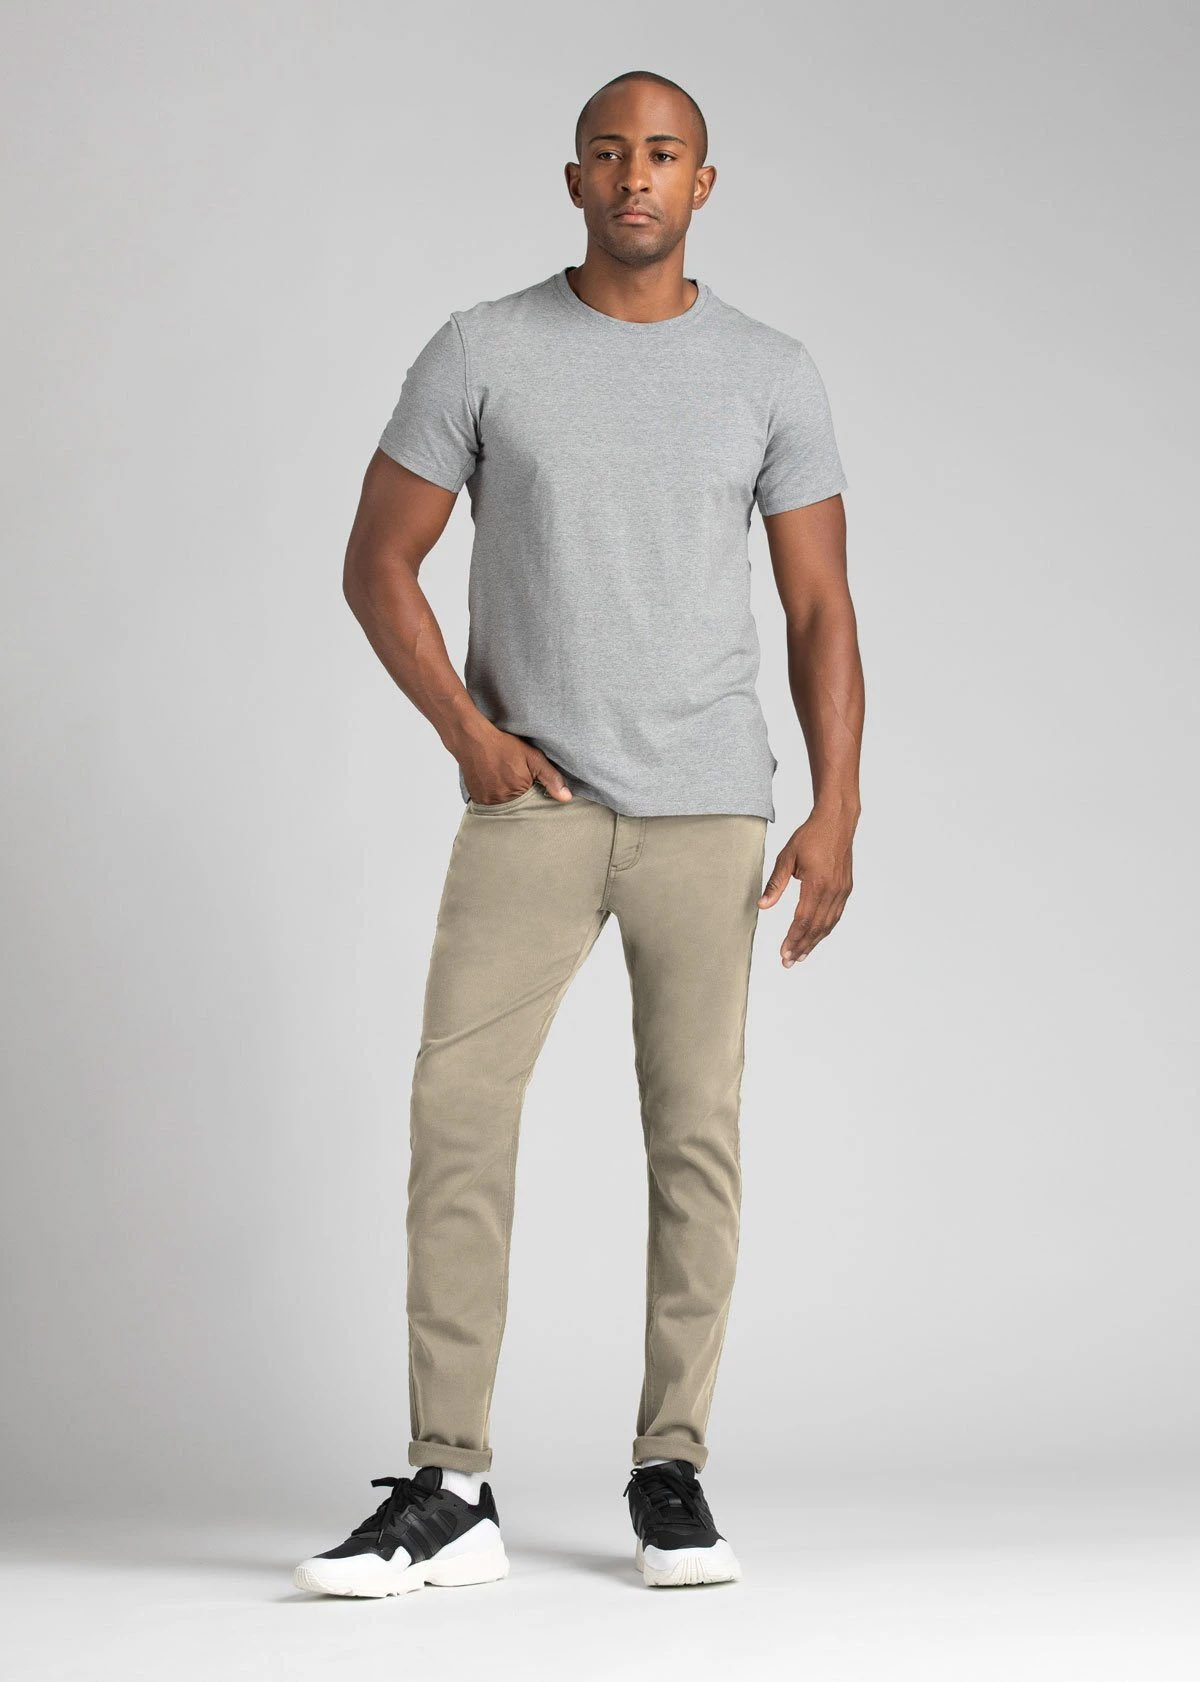 DUER No Sweat Pant: A Performance Jeans - Take More Adventures